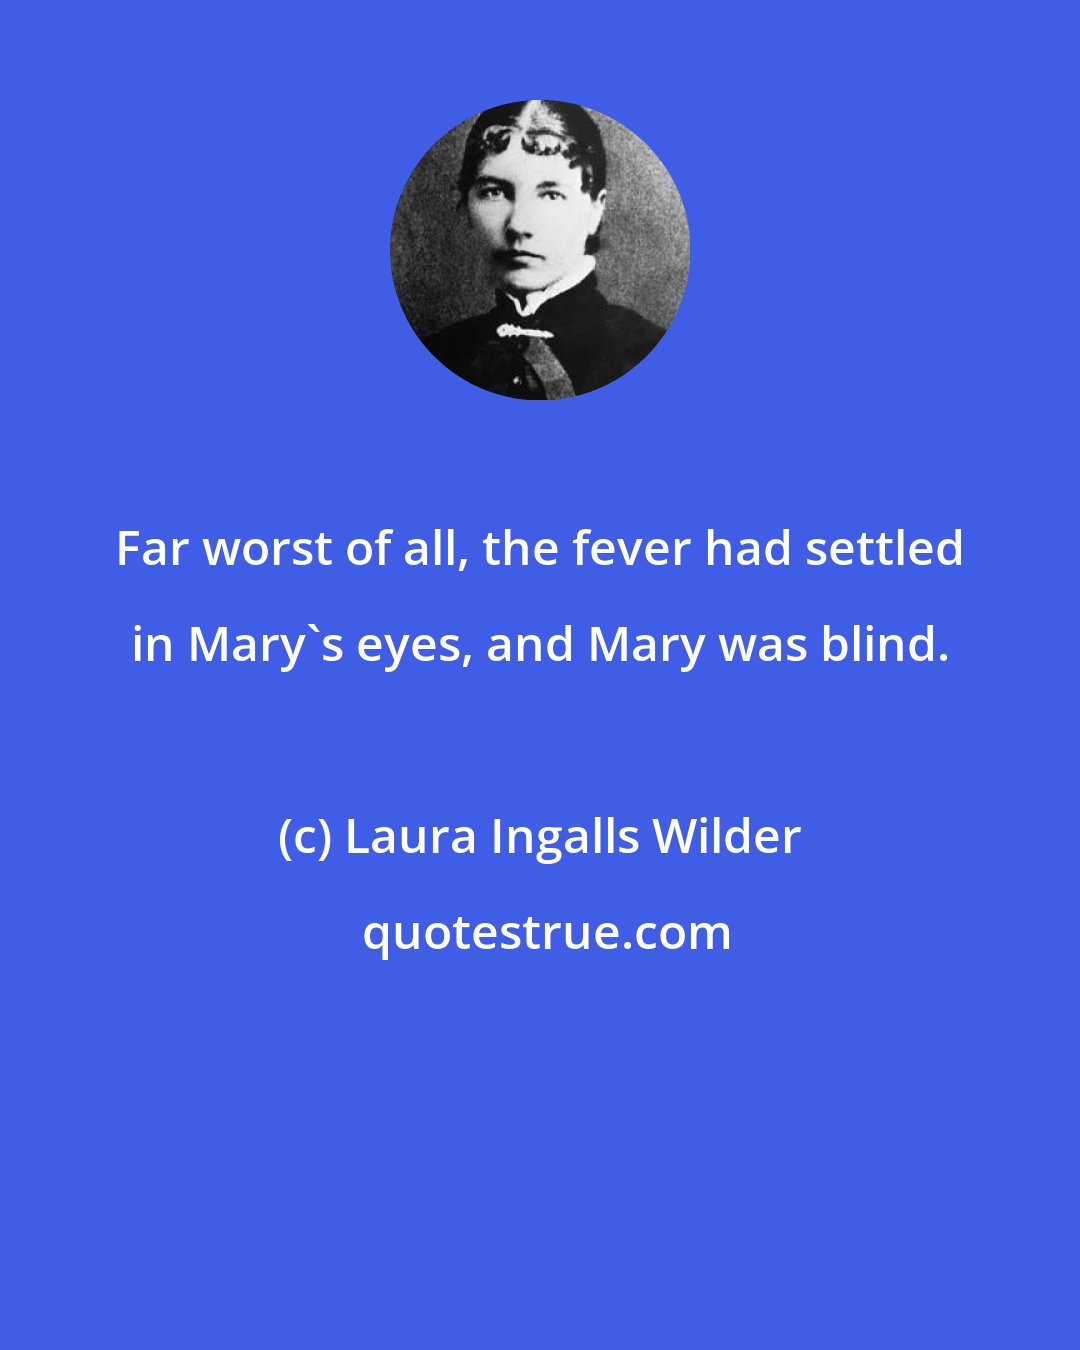 Laura Ingalls Wilder: Far worst of all, the fever had settled in Mary's eyes, and Mary was blind.